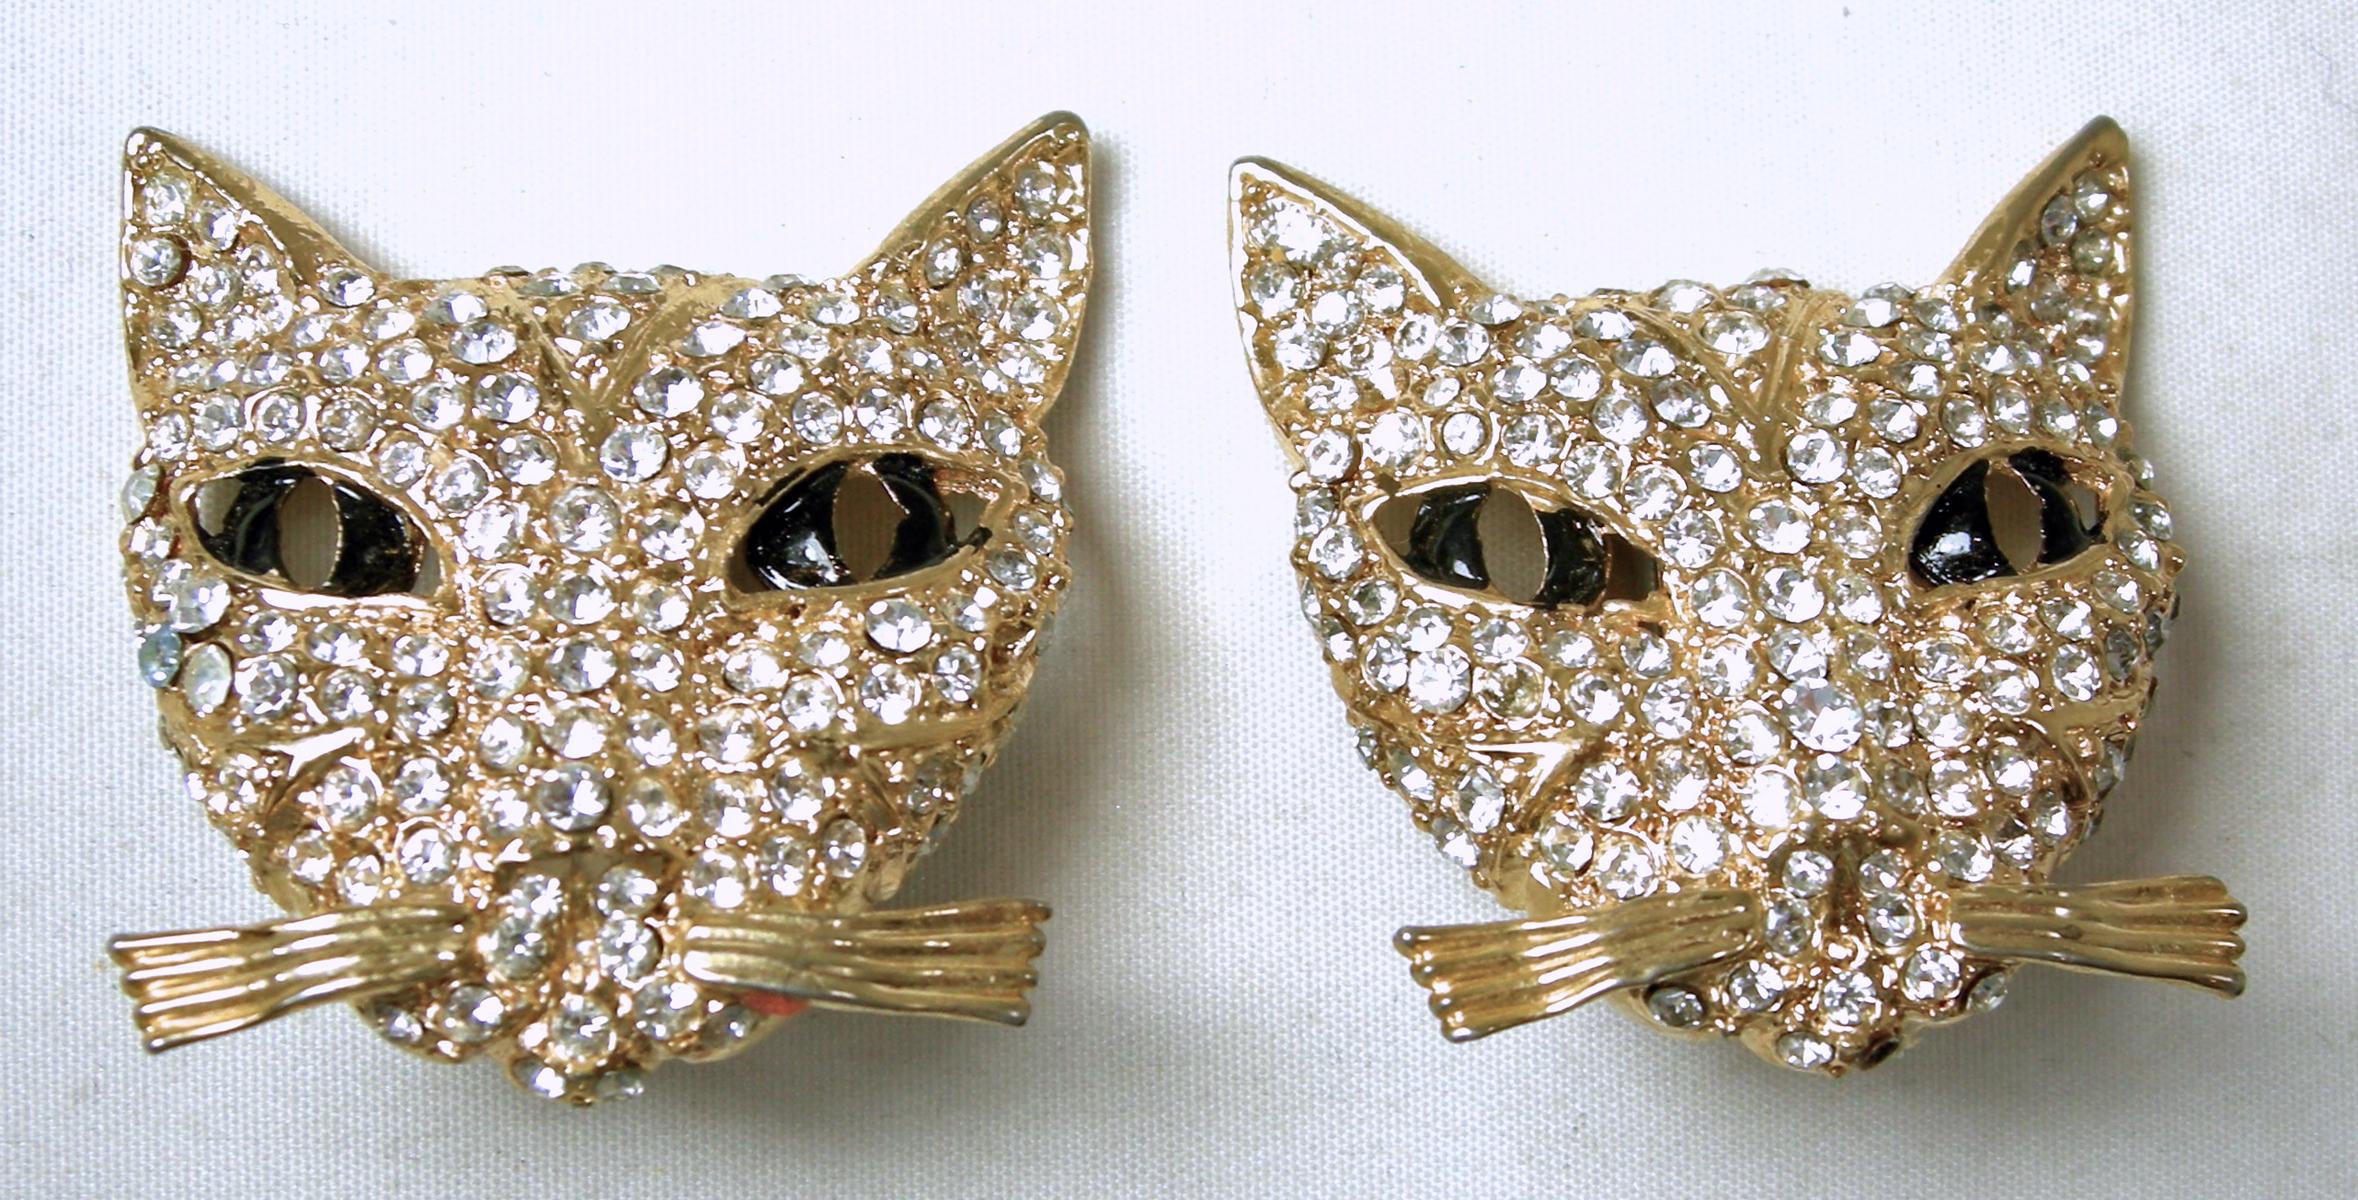 These earrings have a cat design with black crystal eyes surrounded by clear crystals in a gold tone setting.  In excellent condition, these clip earrings measure 1-1/2” x 1-1/2”.